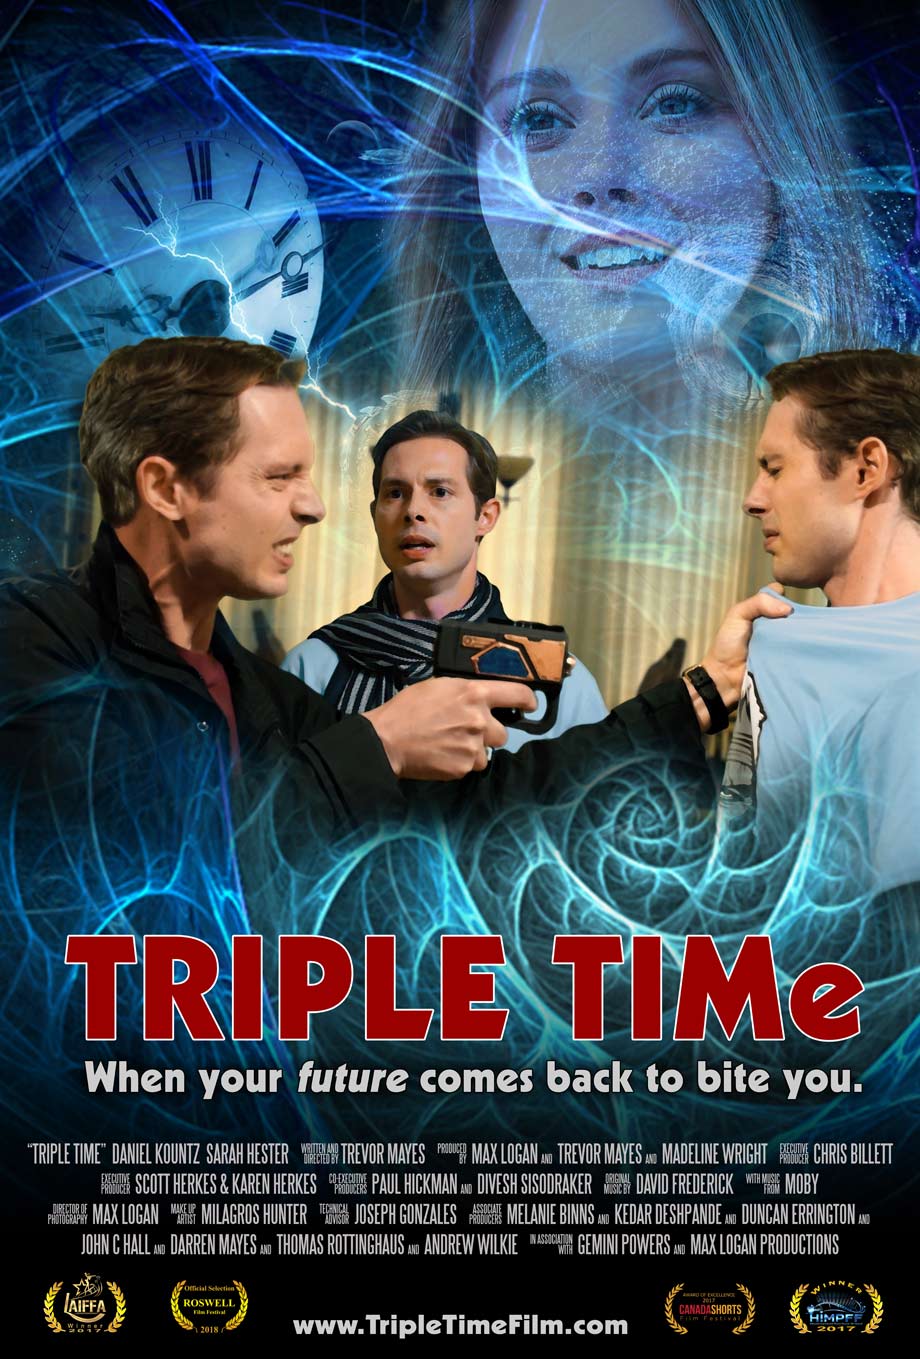 Official TRIPLE TIMe Promo Poster